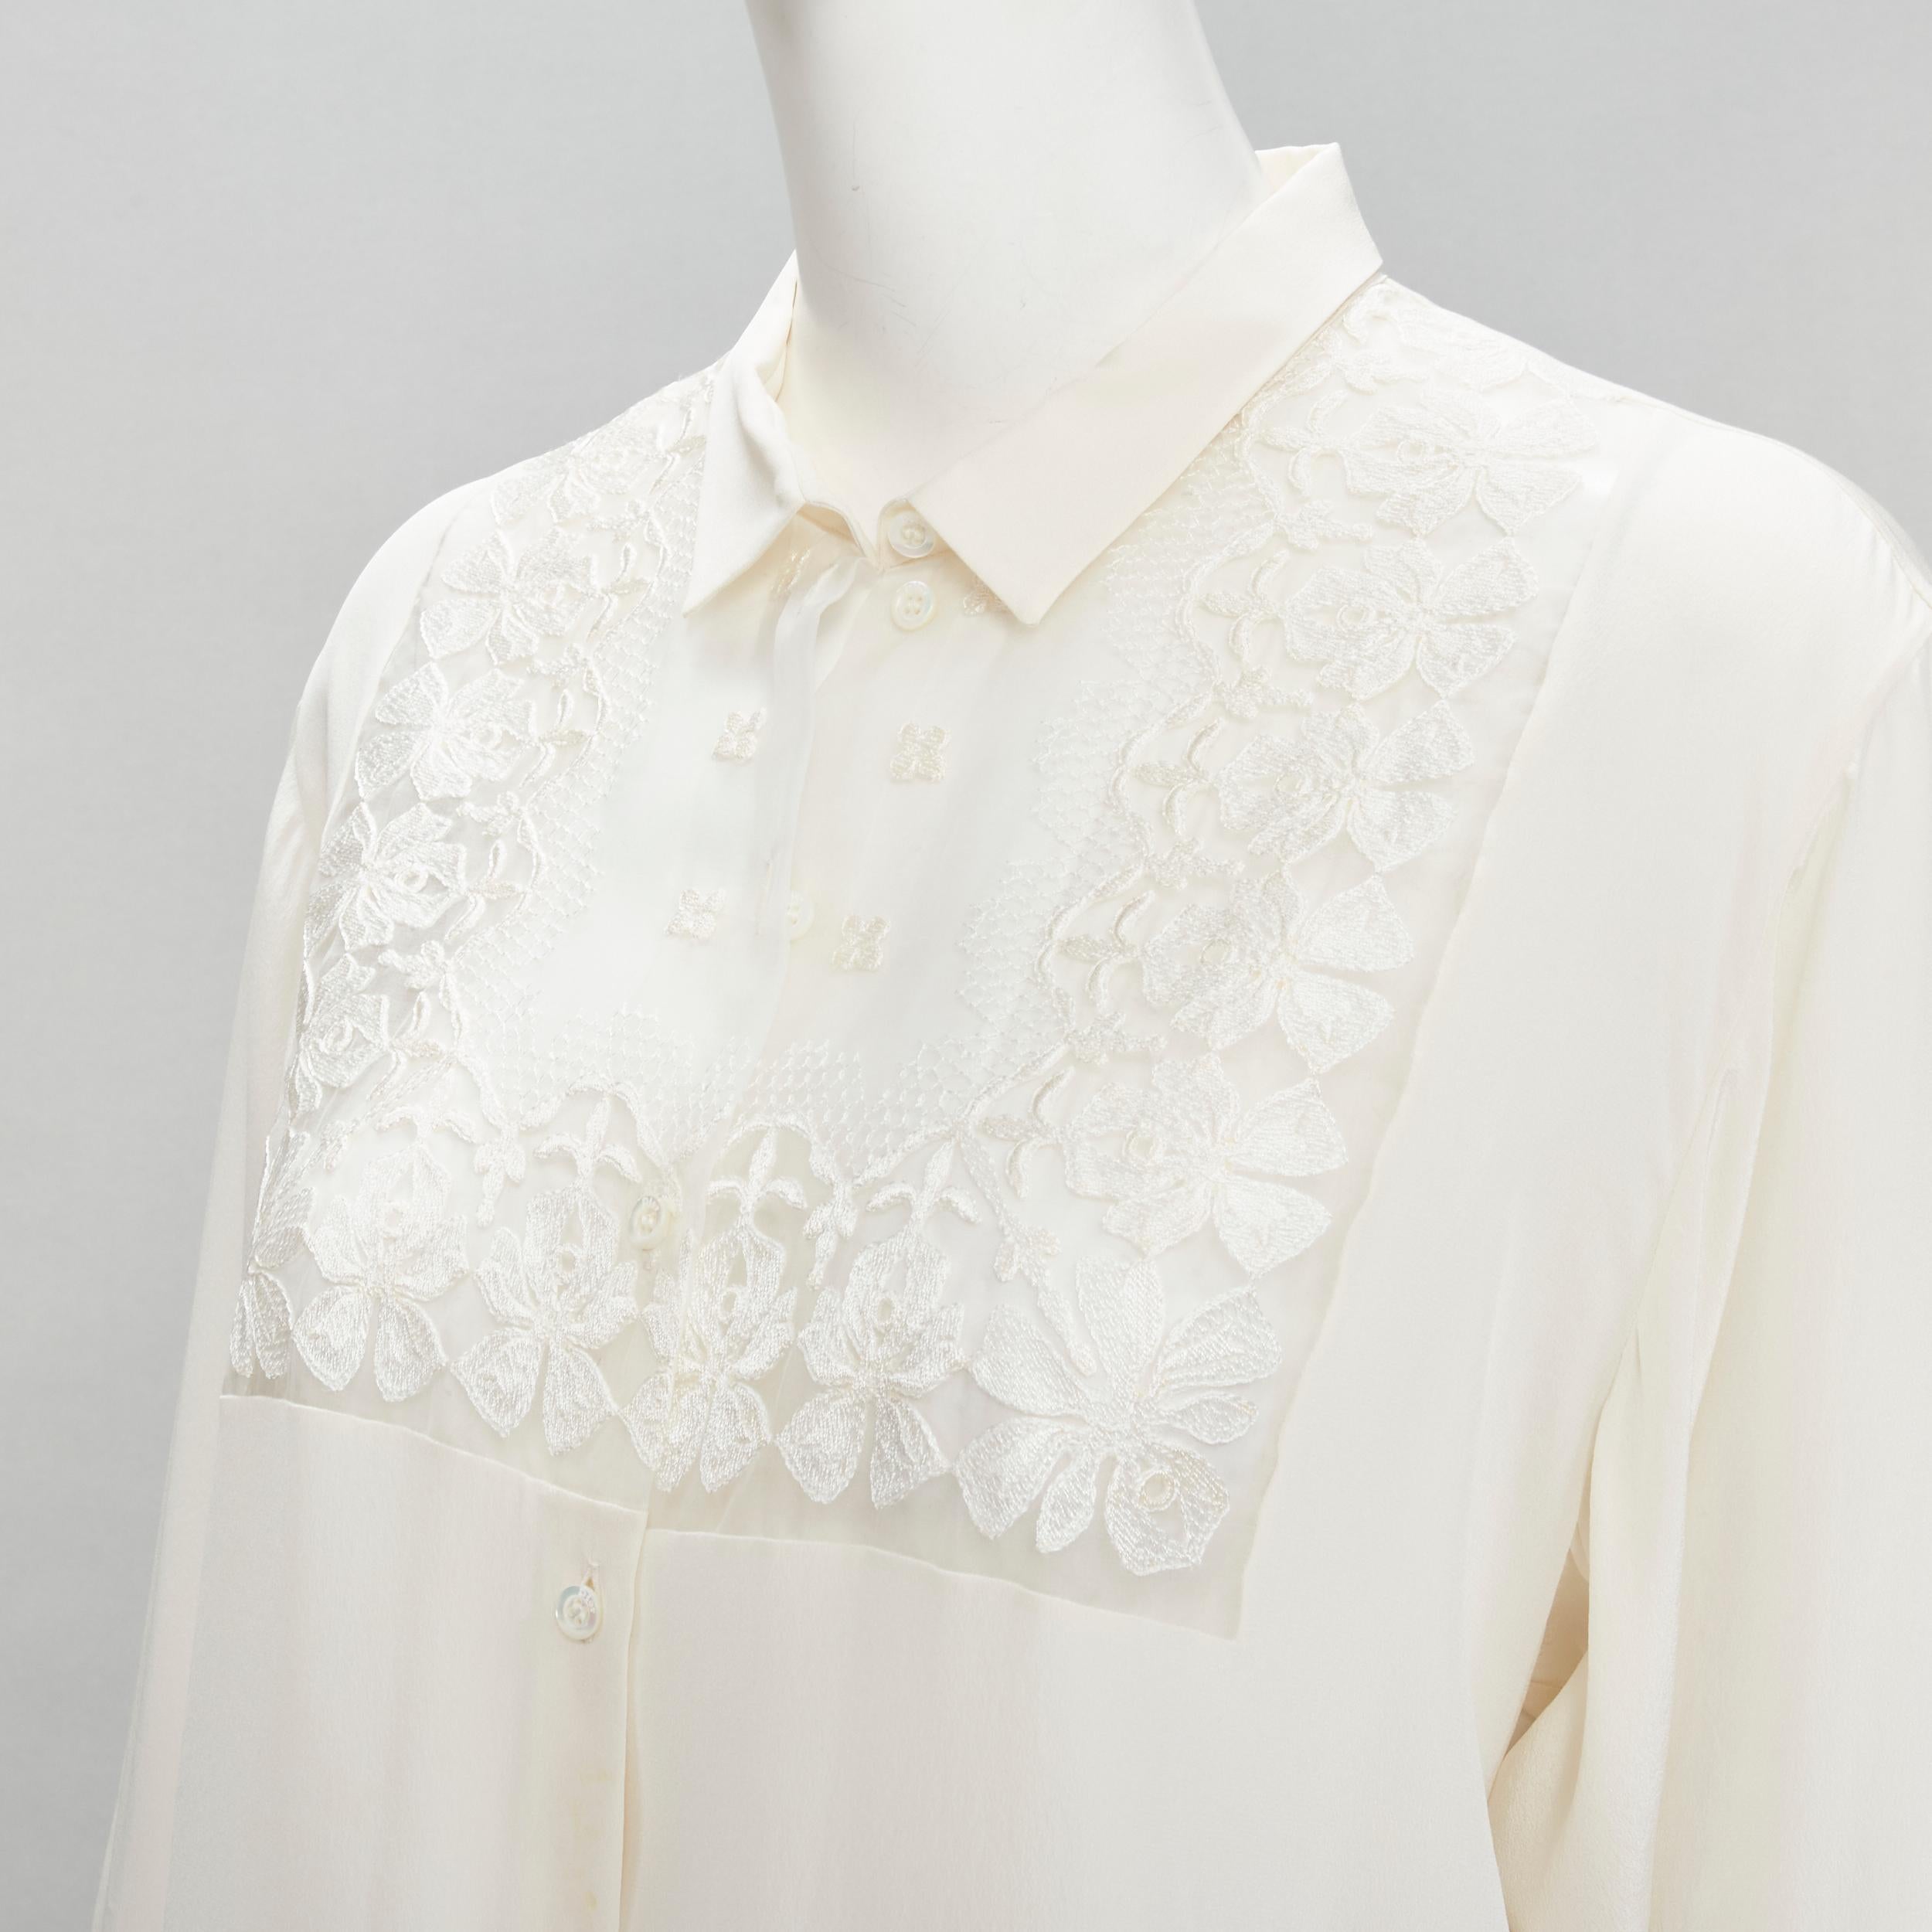 CHRISTIAN DIOR 100% silk sheer floral embroidery long sleeve shirt FR44 XL
Brand: Christian Dior
Material: 100% Silk
Color: Beige
Pattern: Solid
Closure: Button
Extra Detail: Sheer embroidery panel bib collar.
Made in: Italy

CONDITION:
Condition: